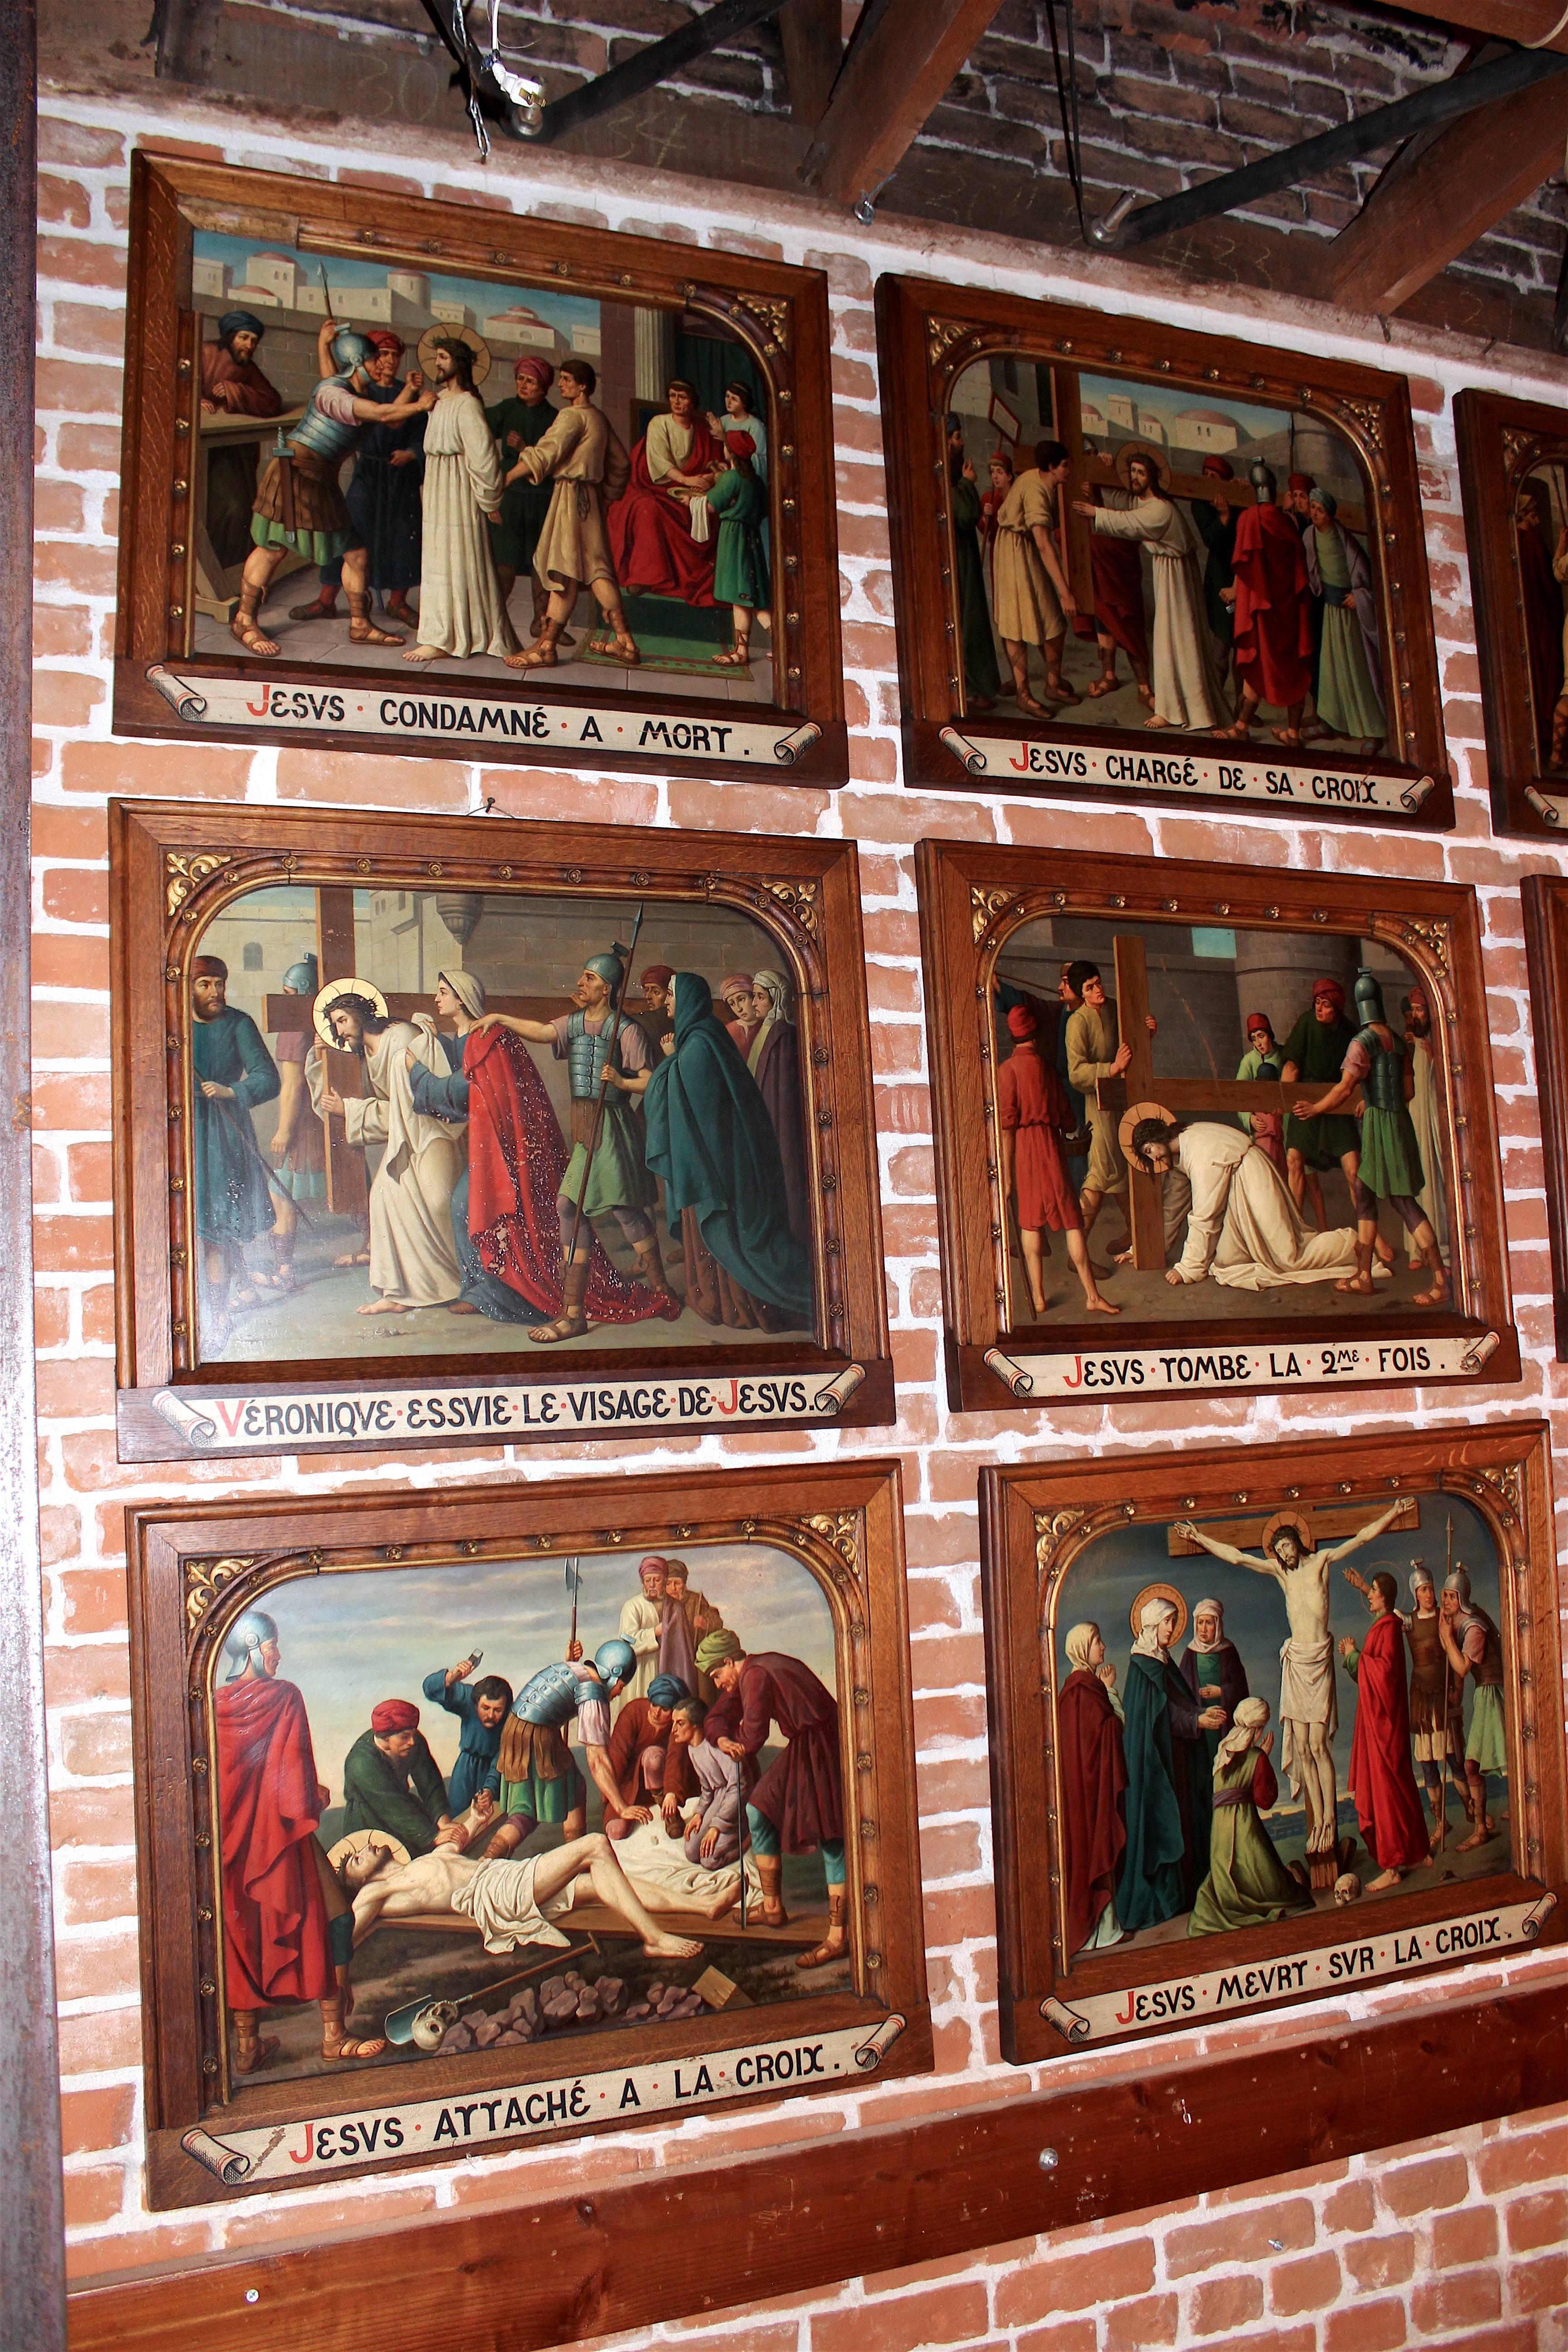 The 14 stations of the cross are depicted on these copper paintings from France. Each depicts one of the stations with the description in French along the bottom edge of the oak frames. The paintings are rendered in full color and are in amazing